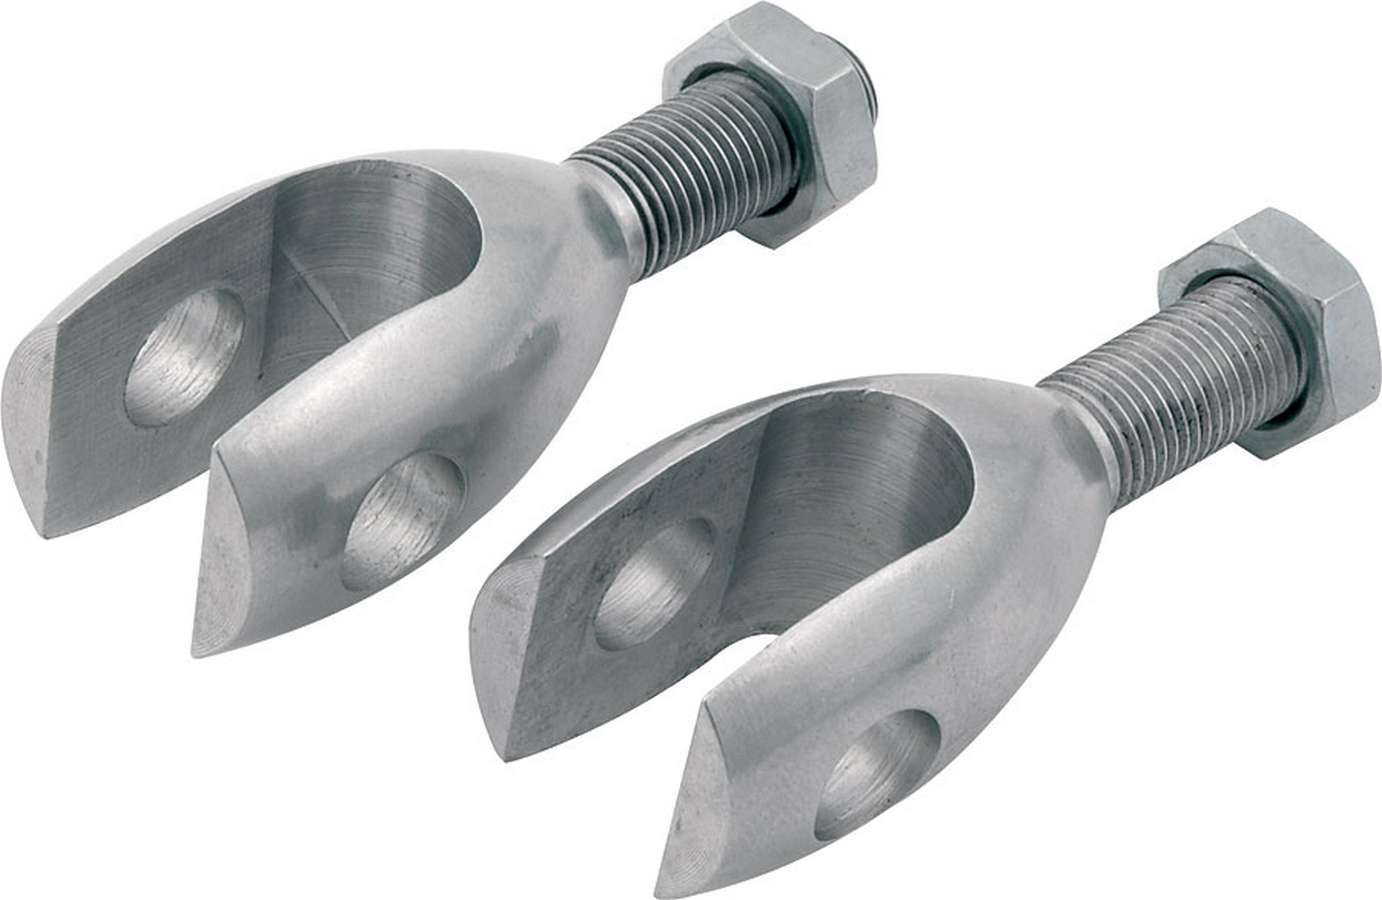 Allstar Performance 54128-10 Rod End, Clevis, 3/8 in Bore, 3/8-24 in Right Hand Male Thread, Jam Nuts, Aluminum, Natural, Bert Transmissions, Set of 10